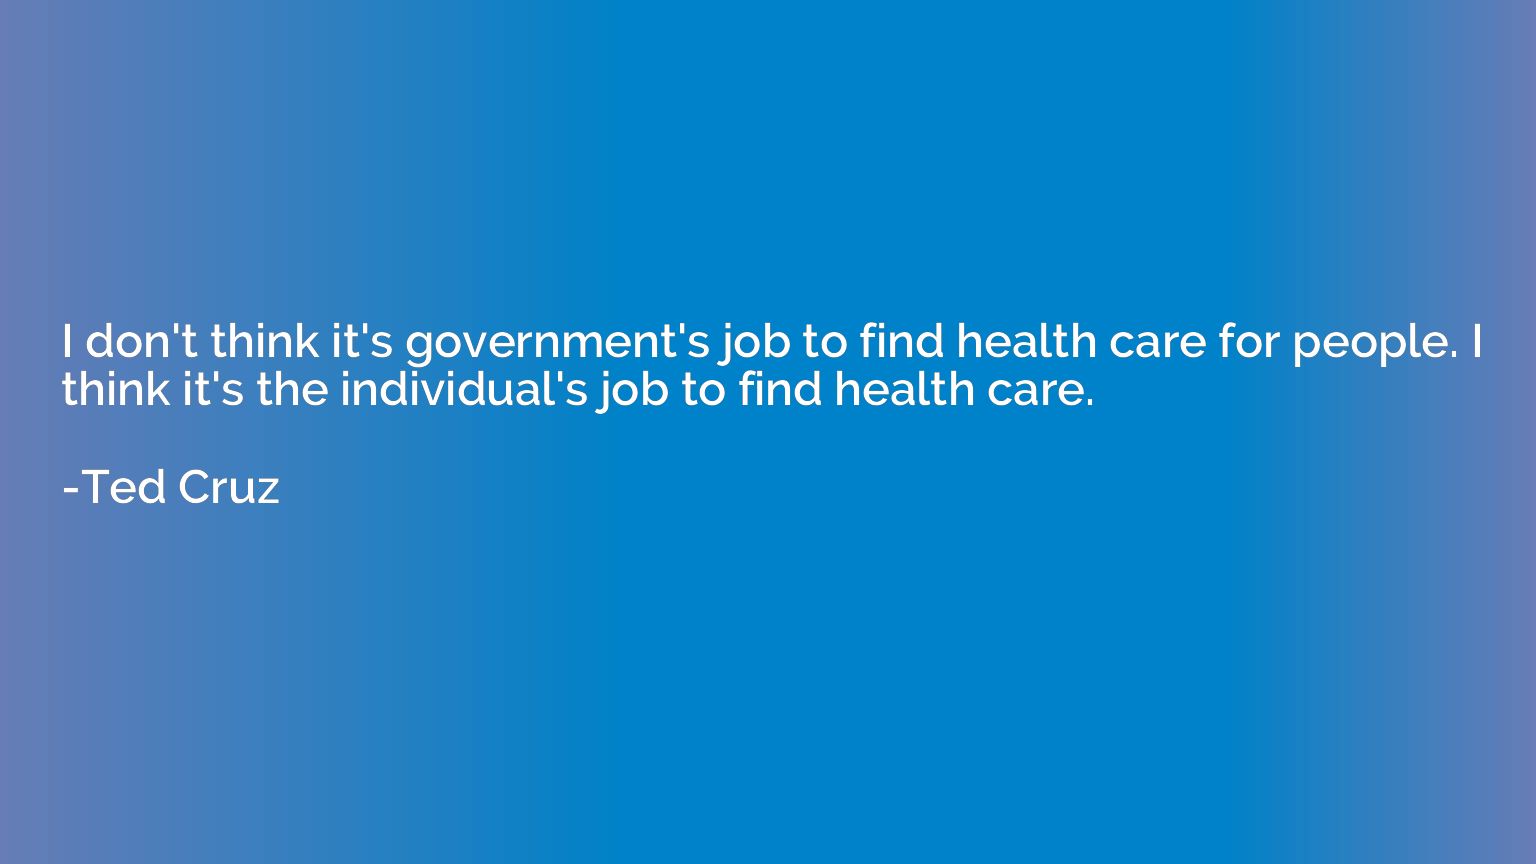 I don't think it's government's job to find health care for 